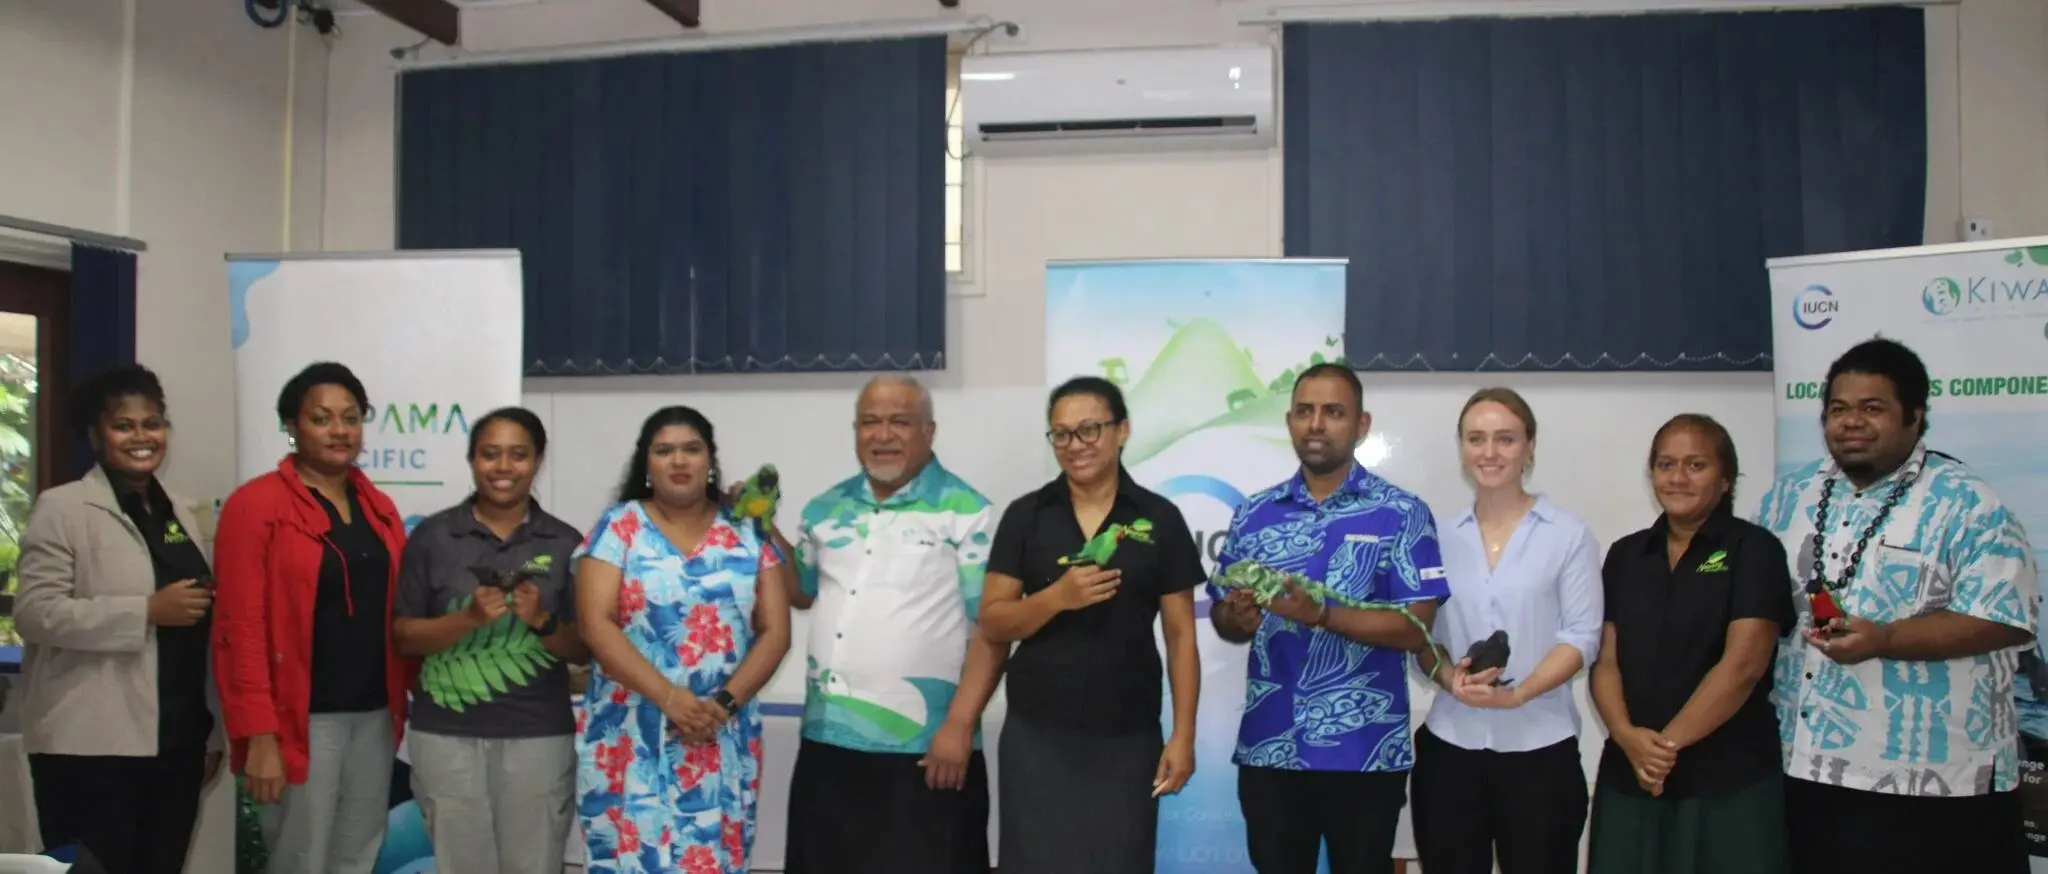 A few of the participants of the Species Congress Fiji event. PC Pacnews